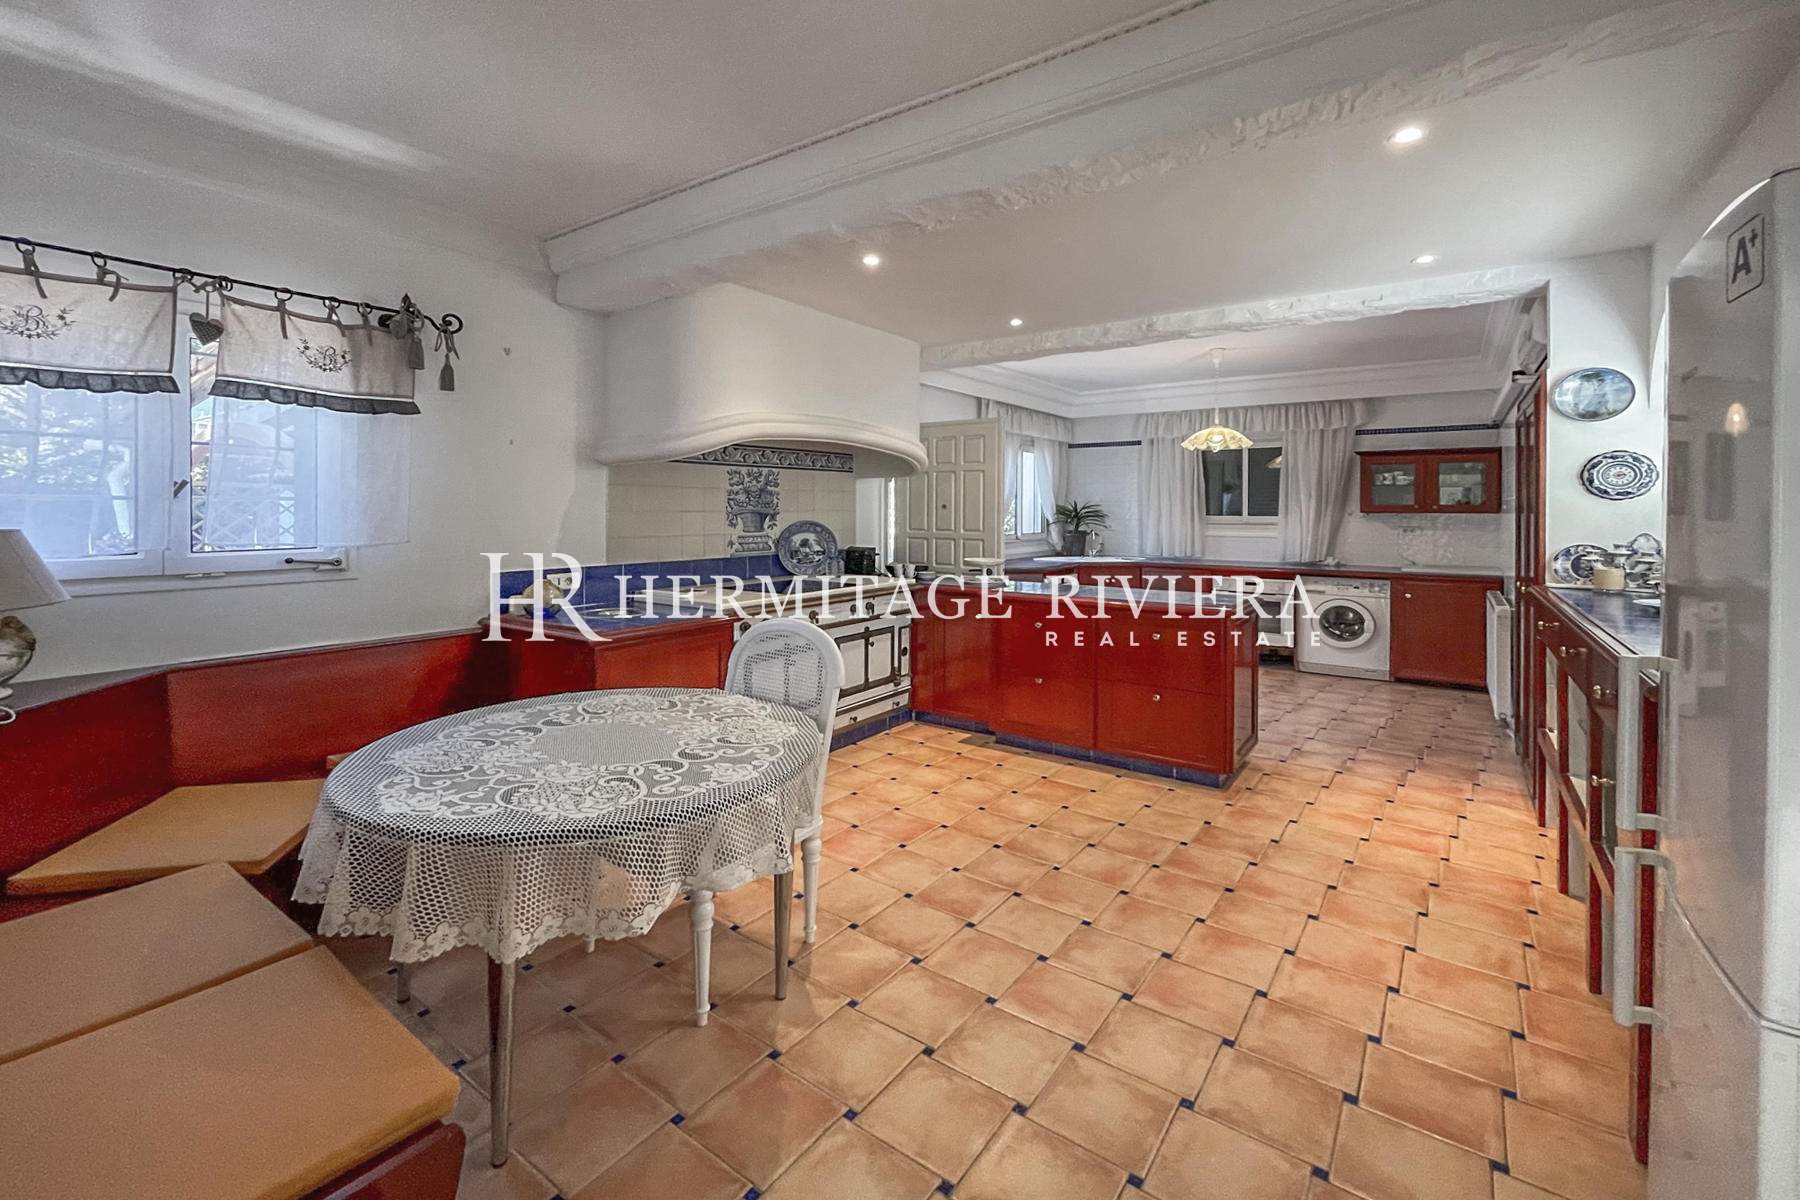 Property with views Monaco in sought after location (image 11)